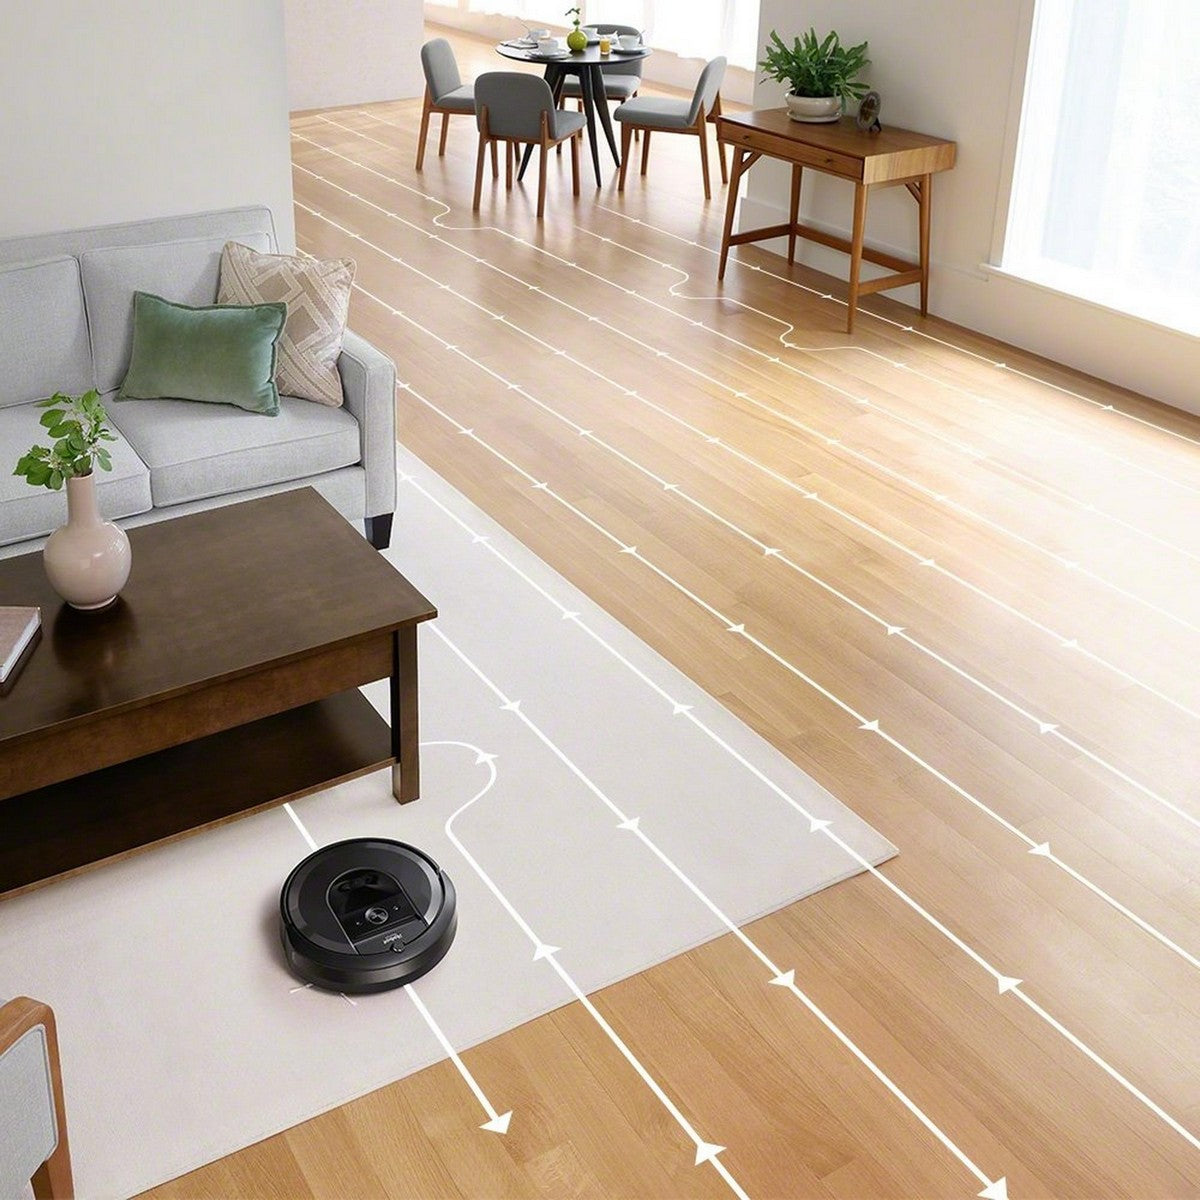 iRobot-Roomba-i7_-Self-Emptying-Robot-Vacuum-Wi-Fi-Connected-listing-at-home